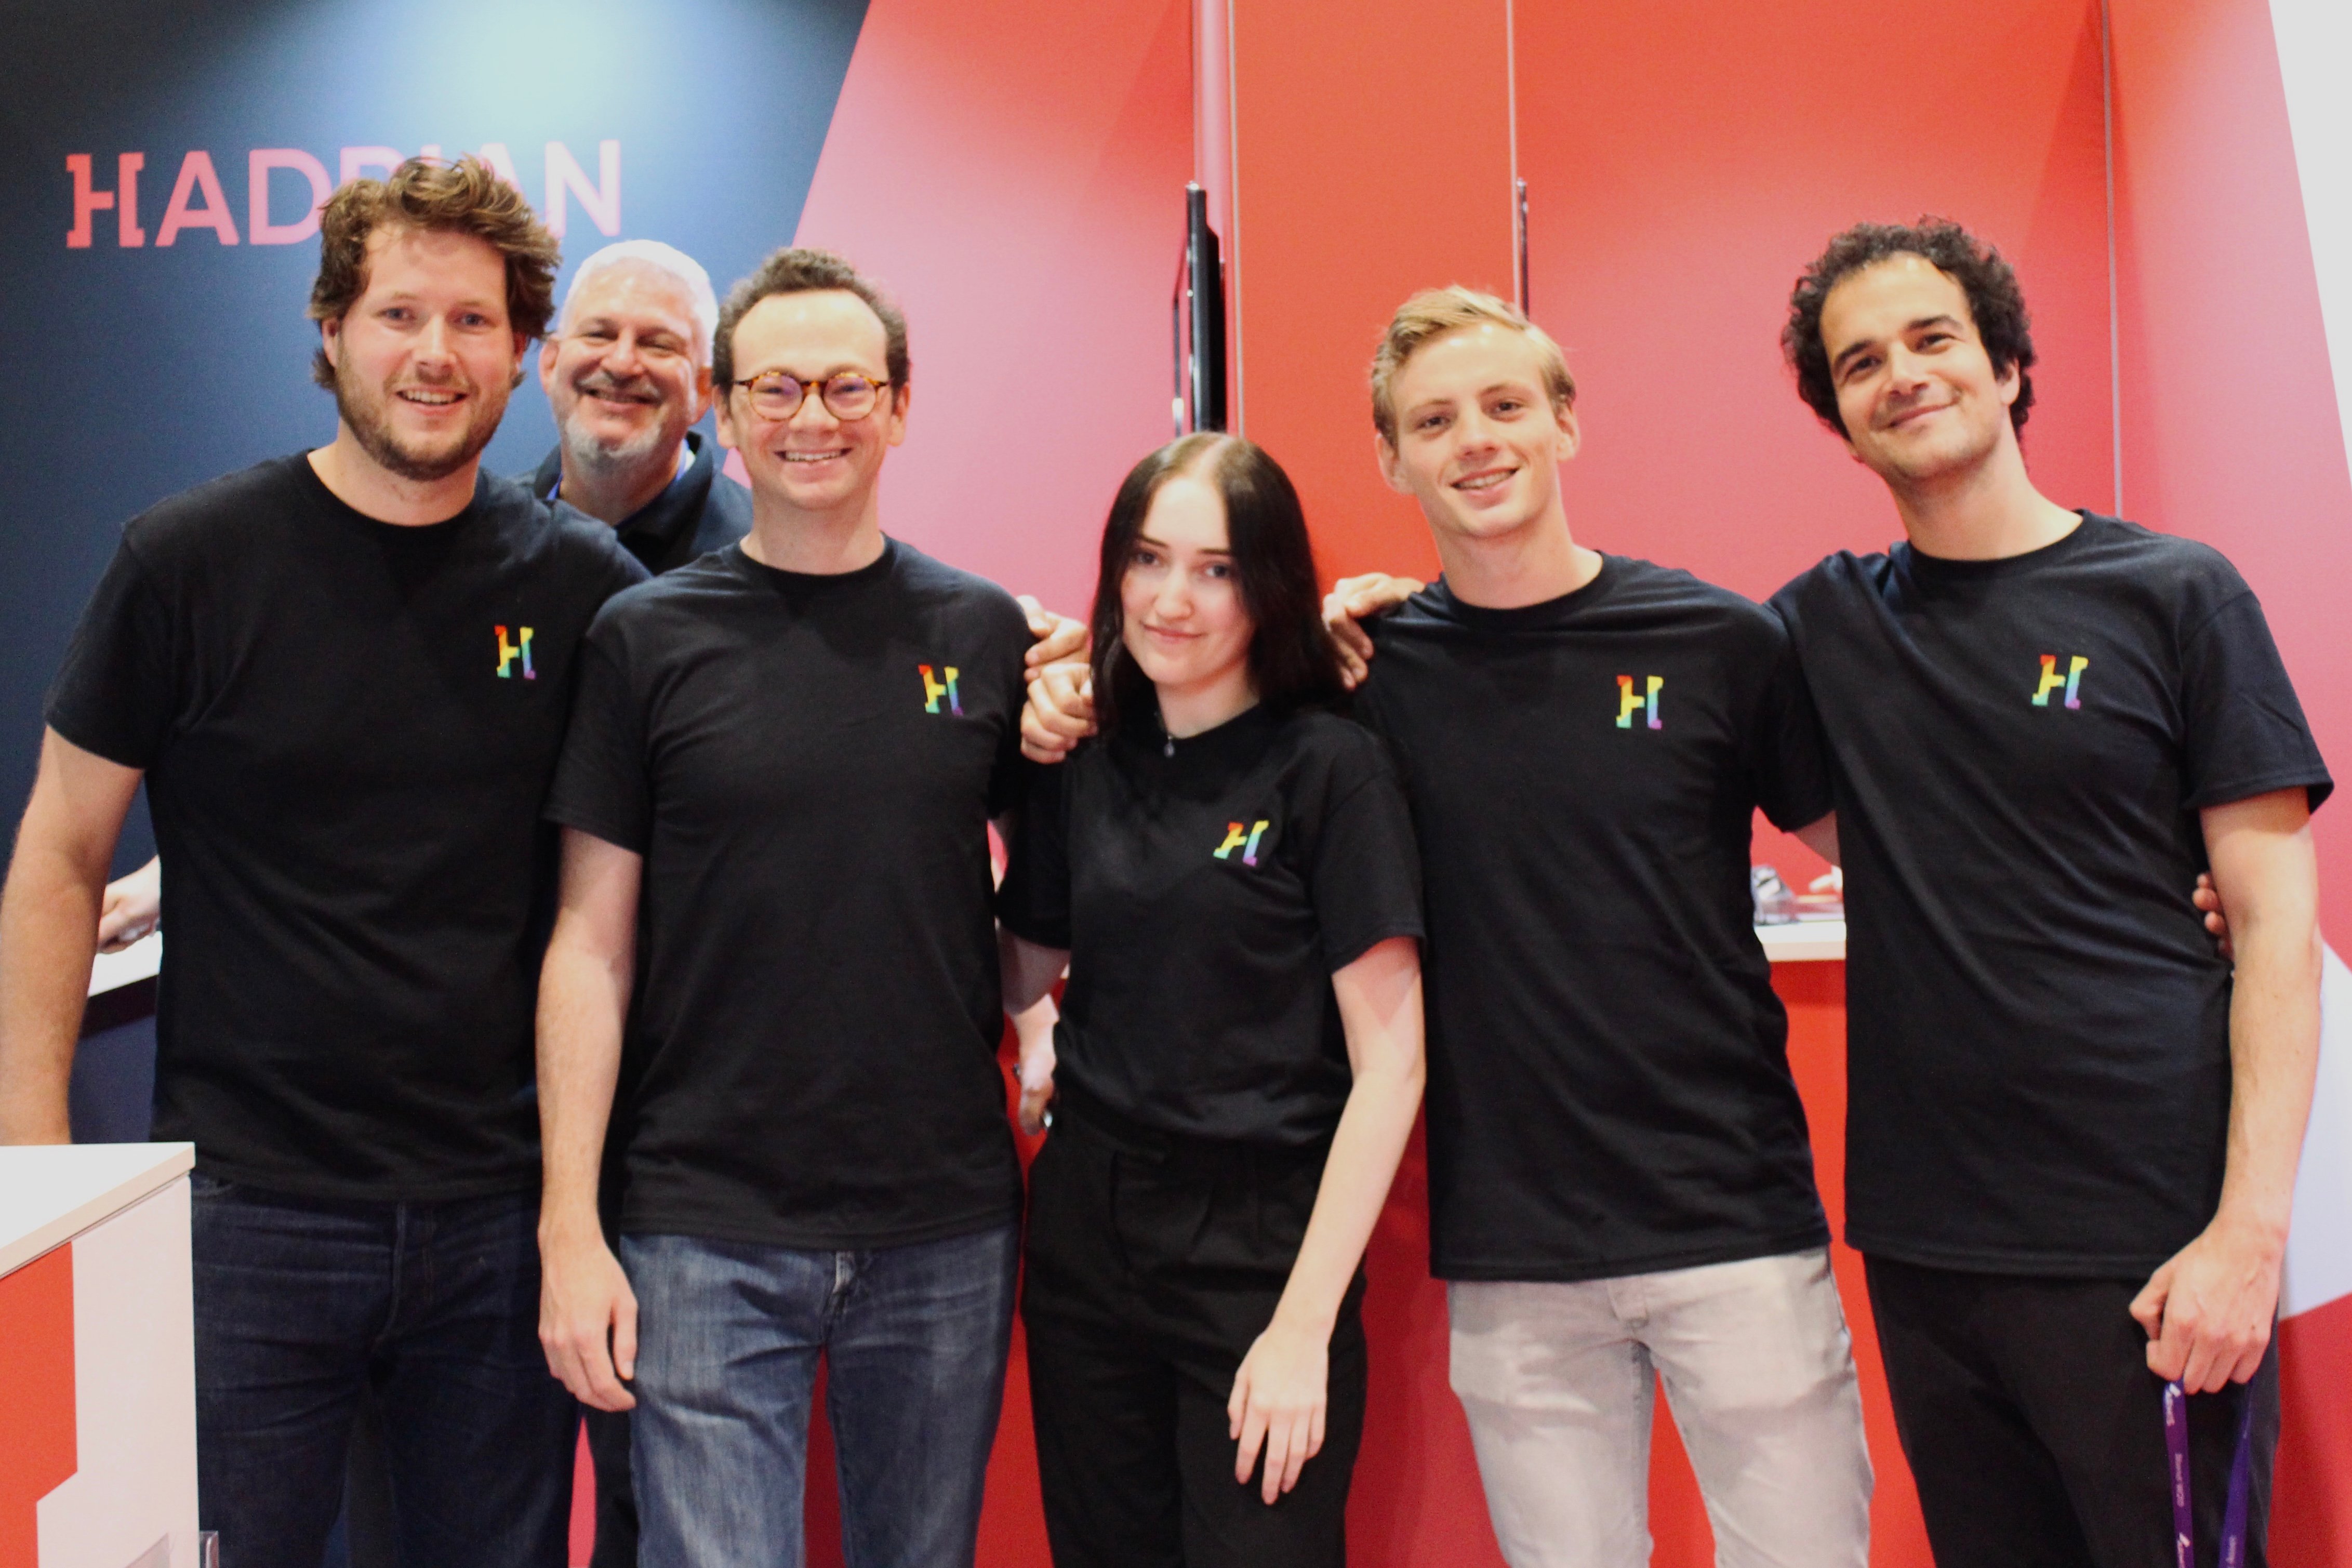 A photo of Hadrian team members standing at Blackhat London in Hadrian Pride t-shirts.